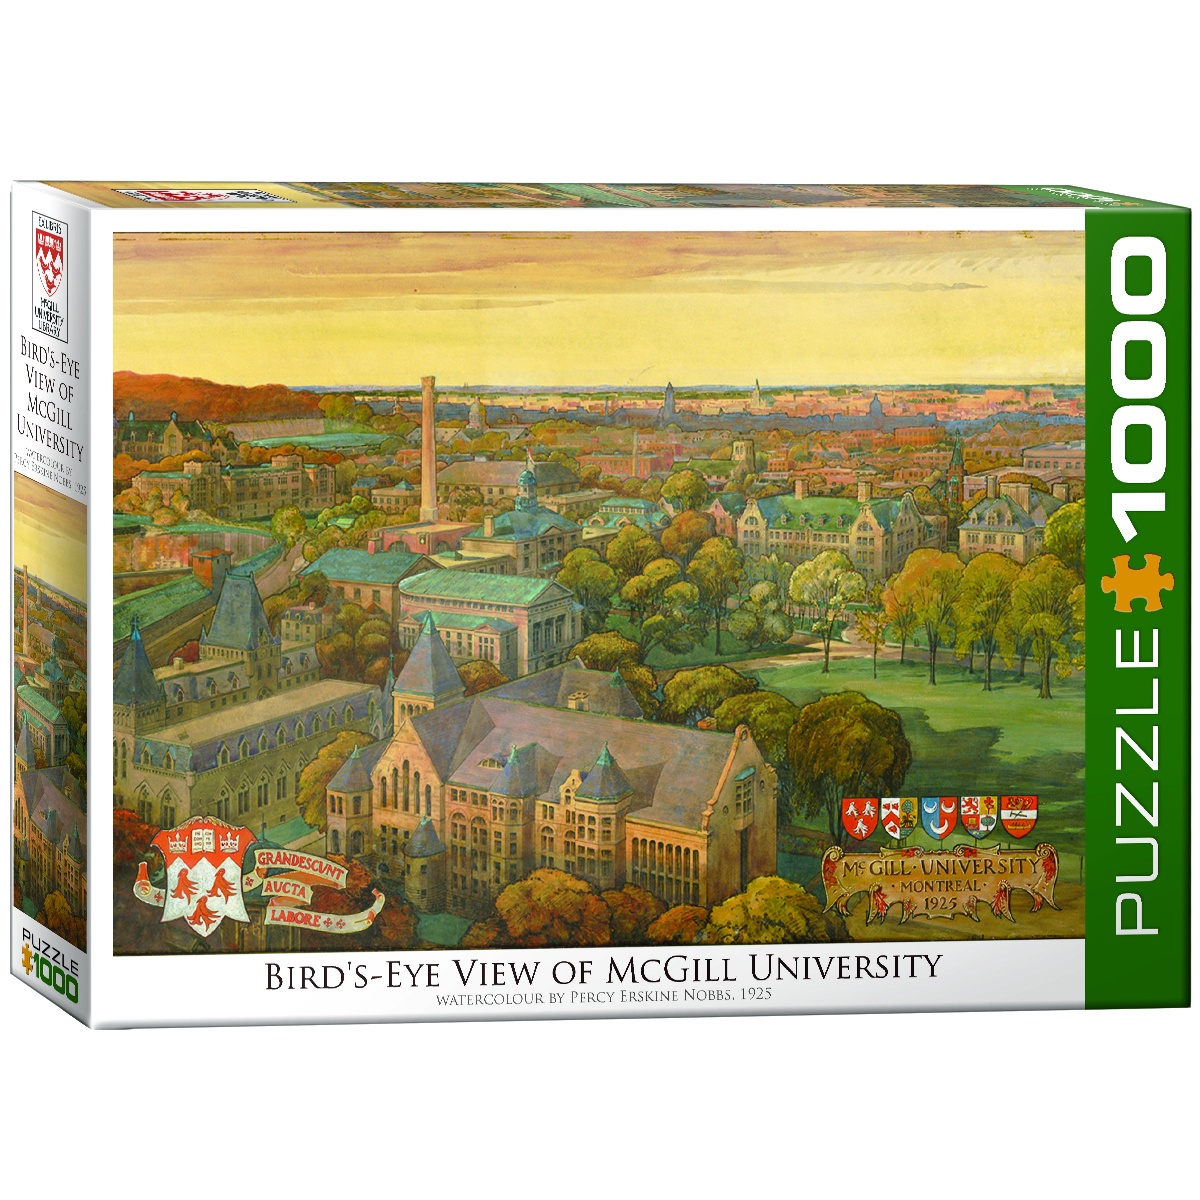 puzzle with view of watercolour painting of McGill University campus, reading "bird's-eye View of McGill University, watercolour by Percy Erskine Nobbs 1925.